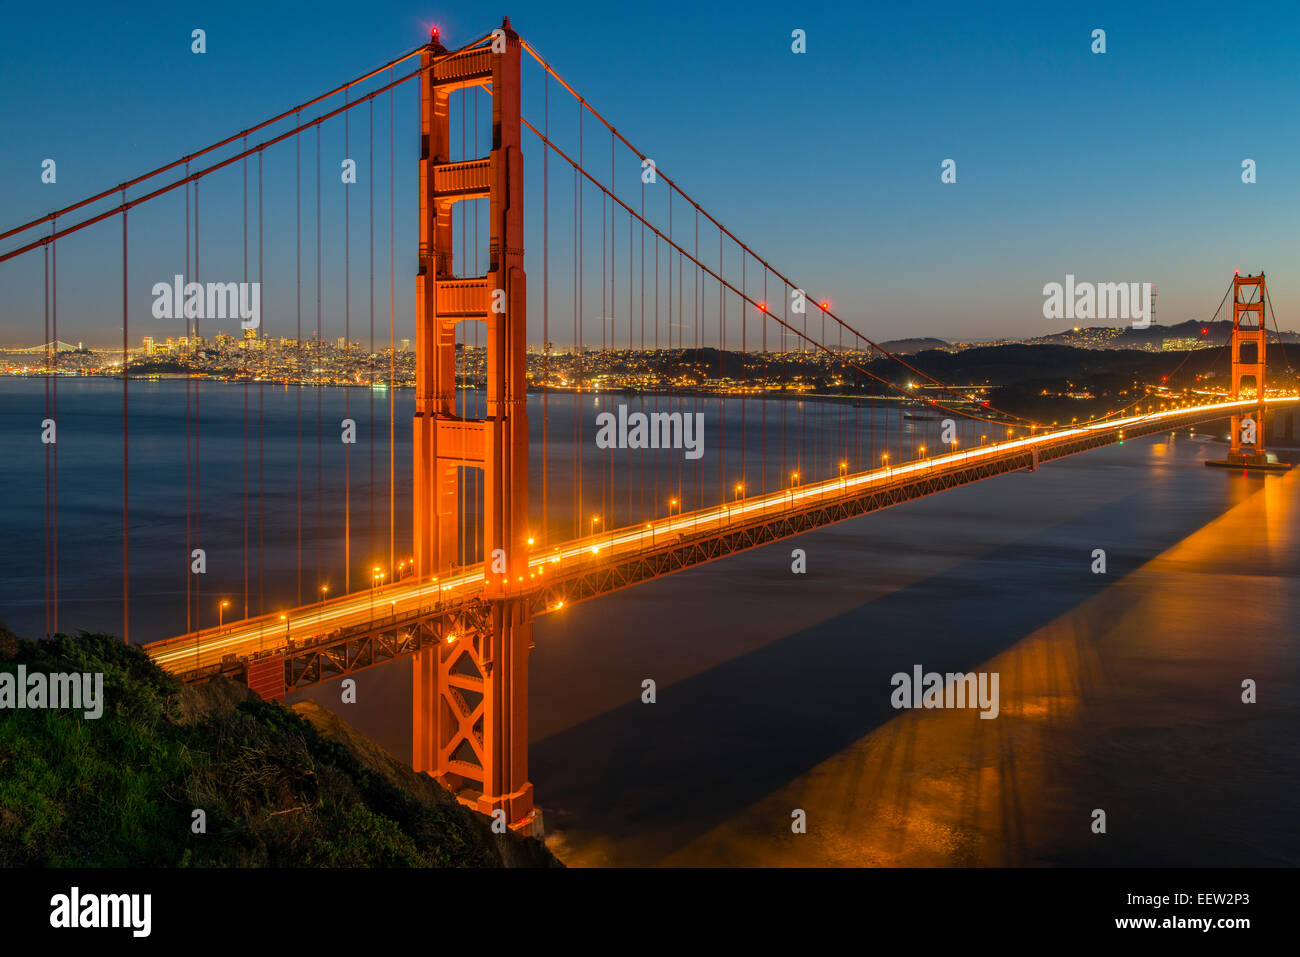 Night view of the Golden Gate suspension bridge with city skyline in the background, San Francisco, California, USA Stock Photo